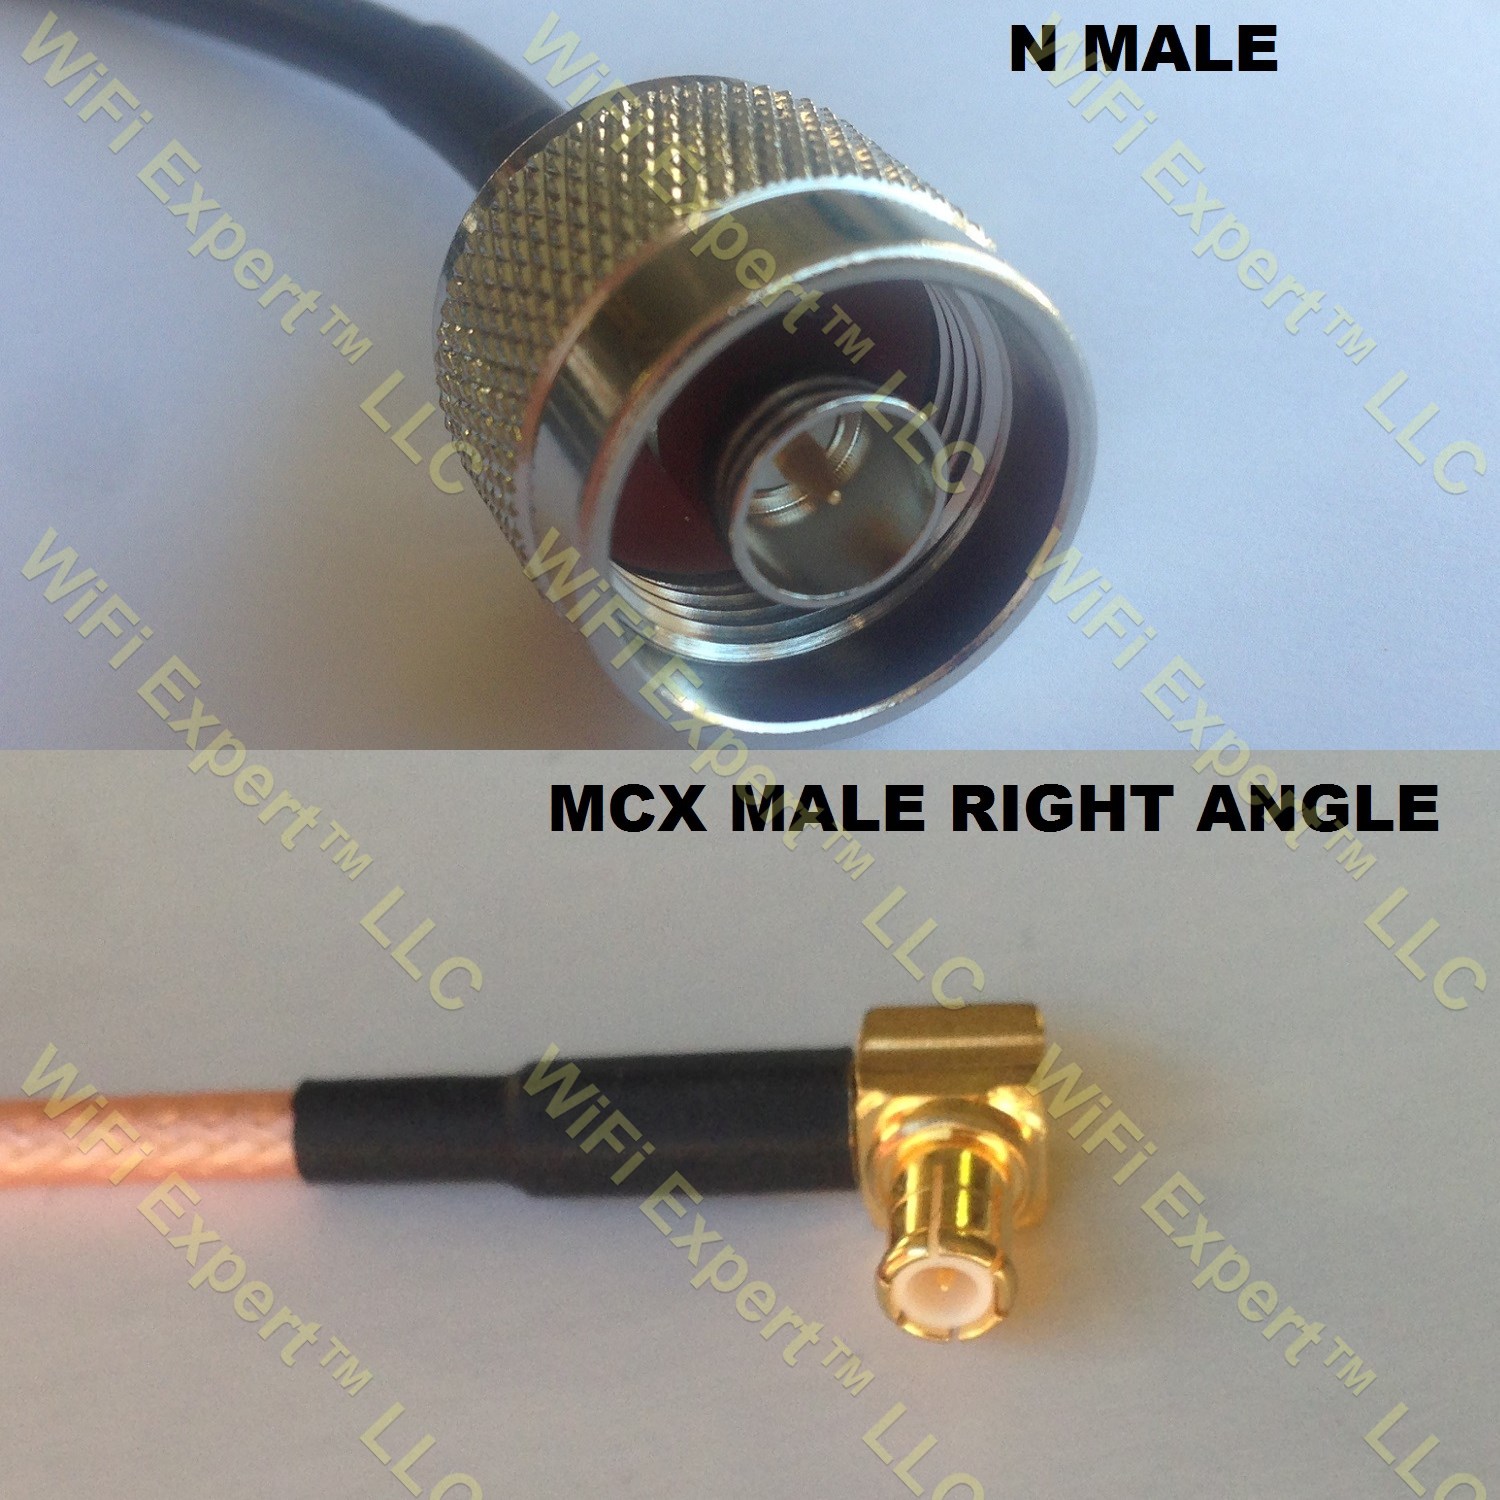 6 feet RG316 TS9 Angle Male to SMA Female O-Ring RF Pigtail Coaxial Cable